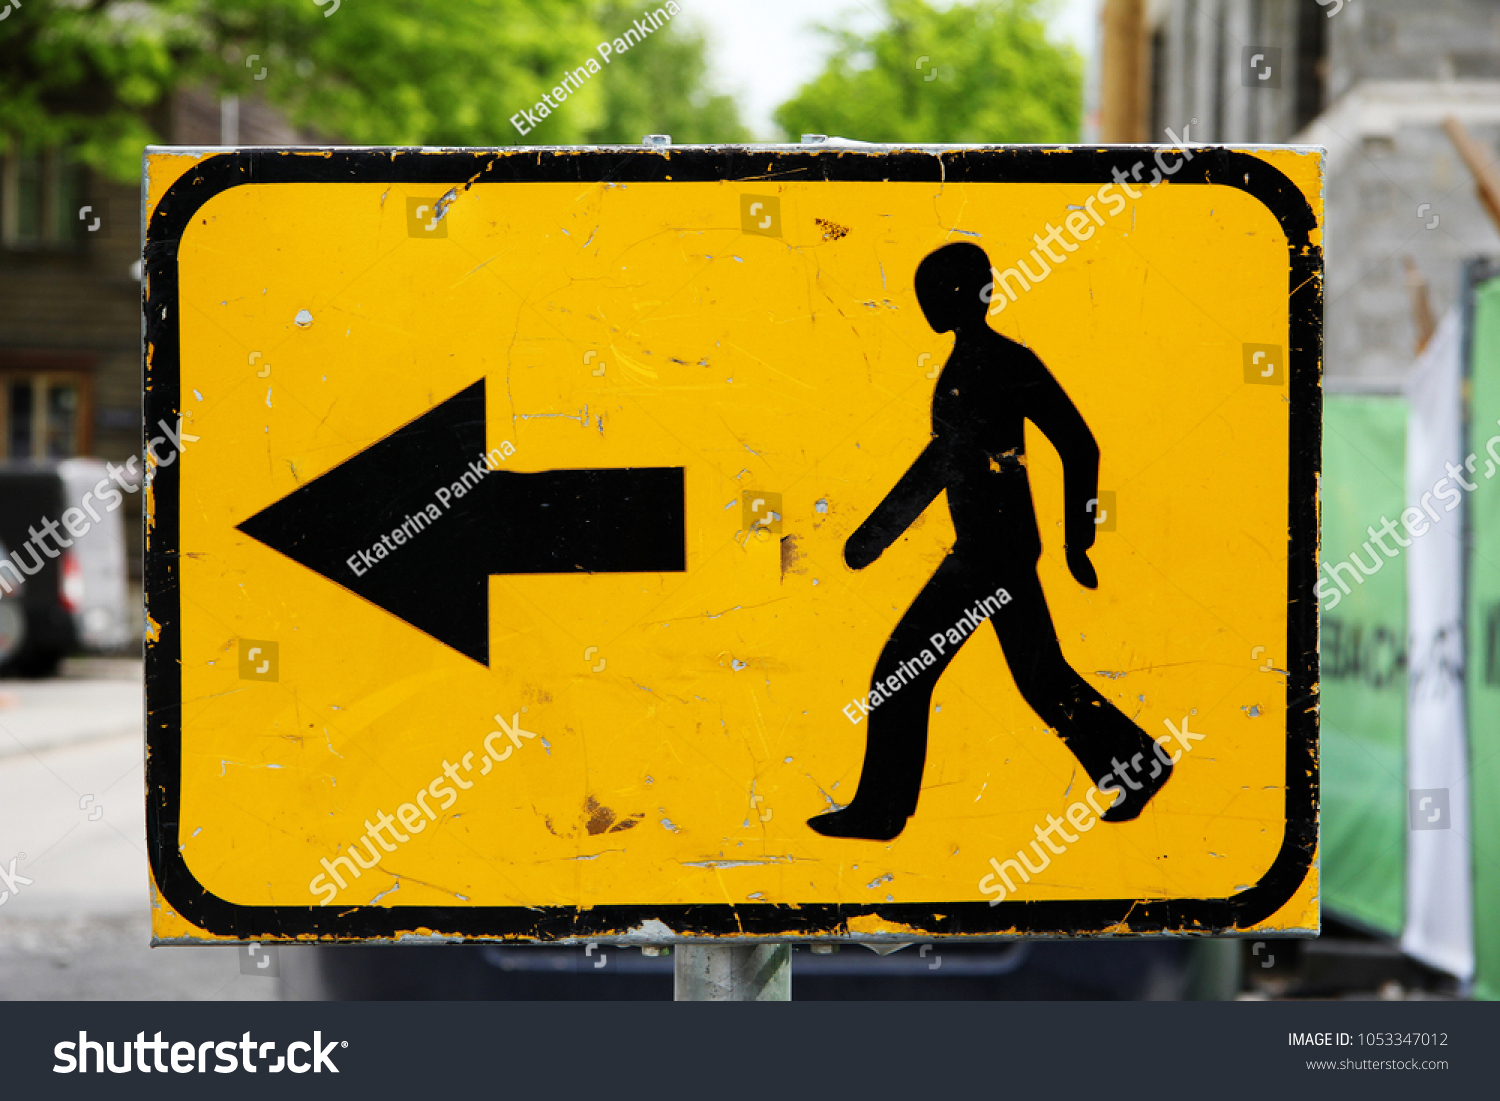 Traffic sign: on a yellow background a black silhouette of a walking man and a black arrow to the left against a city landscape background. Signs, symbols. #1053347012